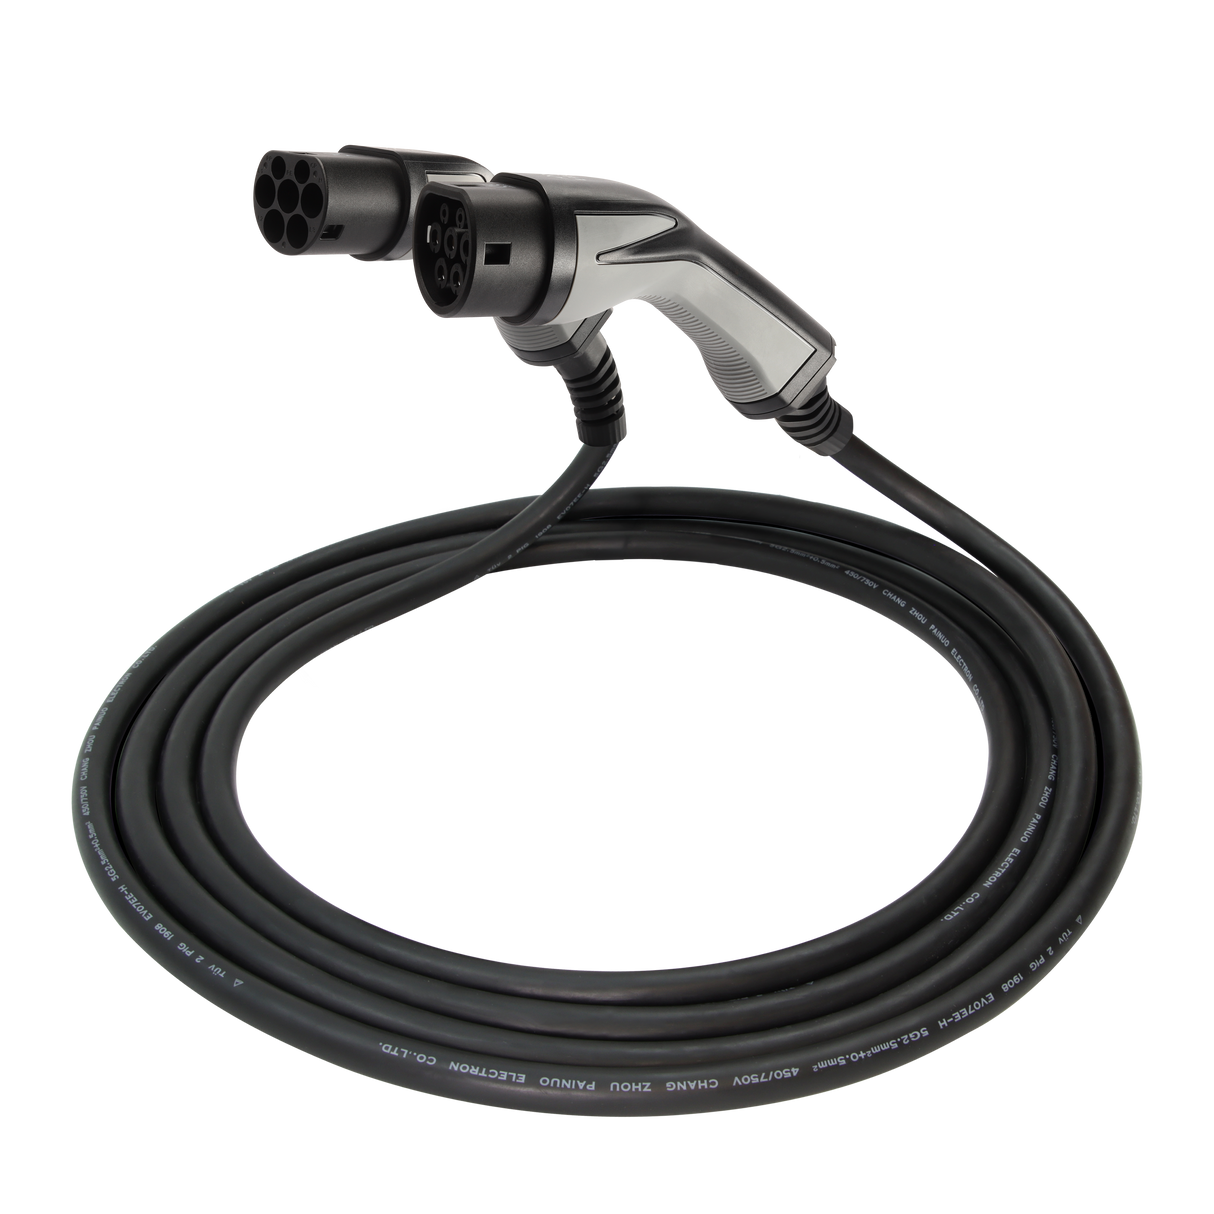 Charging cable Mercedes GLA - Erock Pro Type 2 - 16A 3 phase (11 kW)